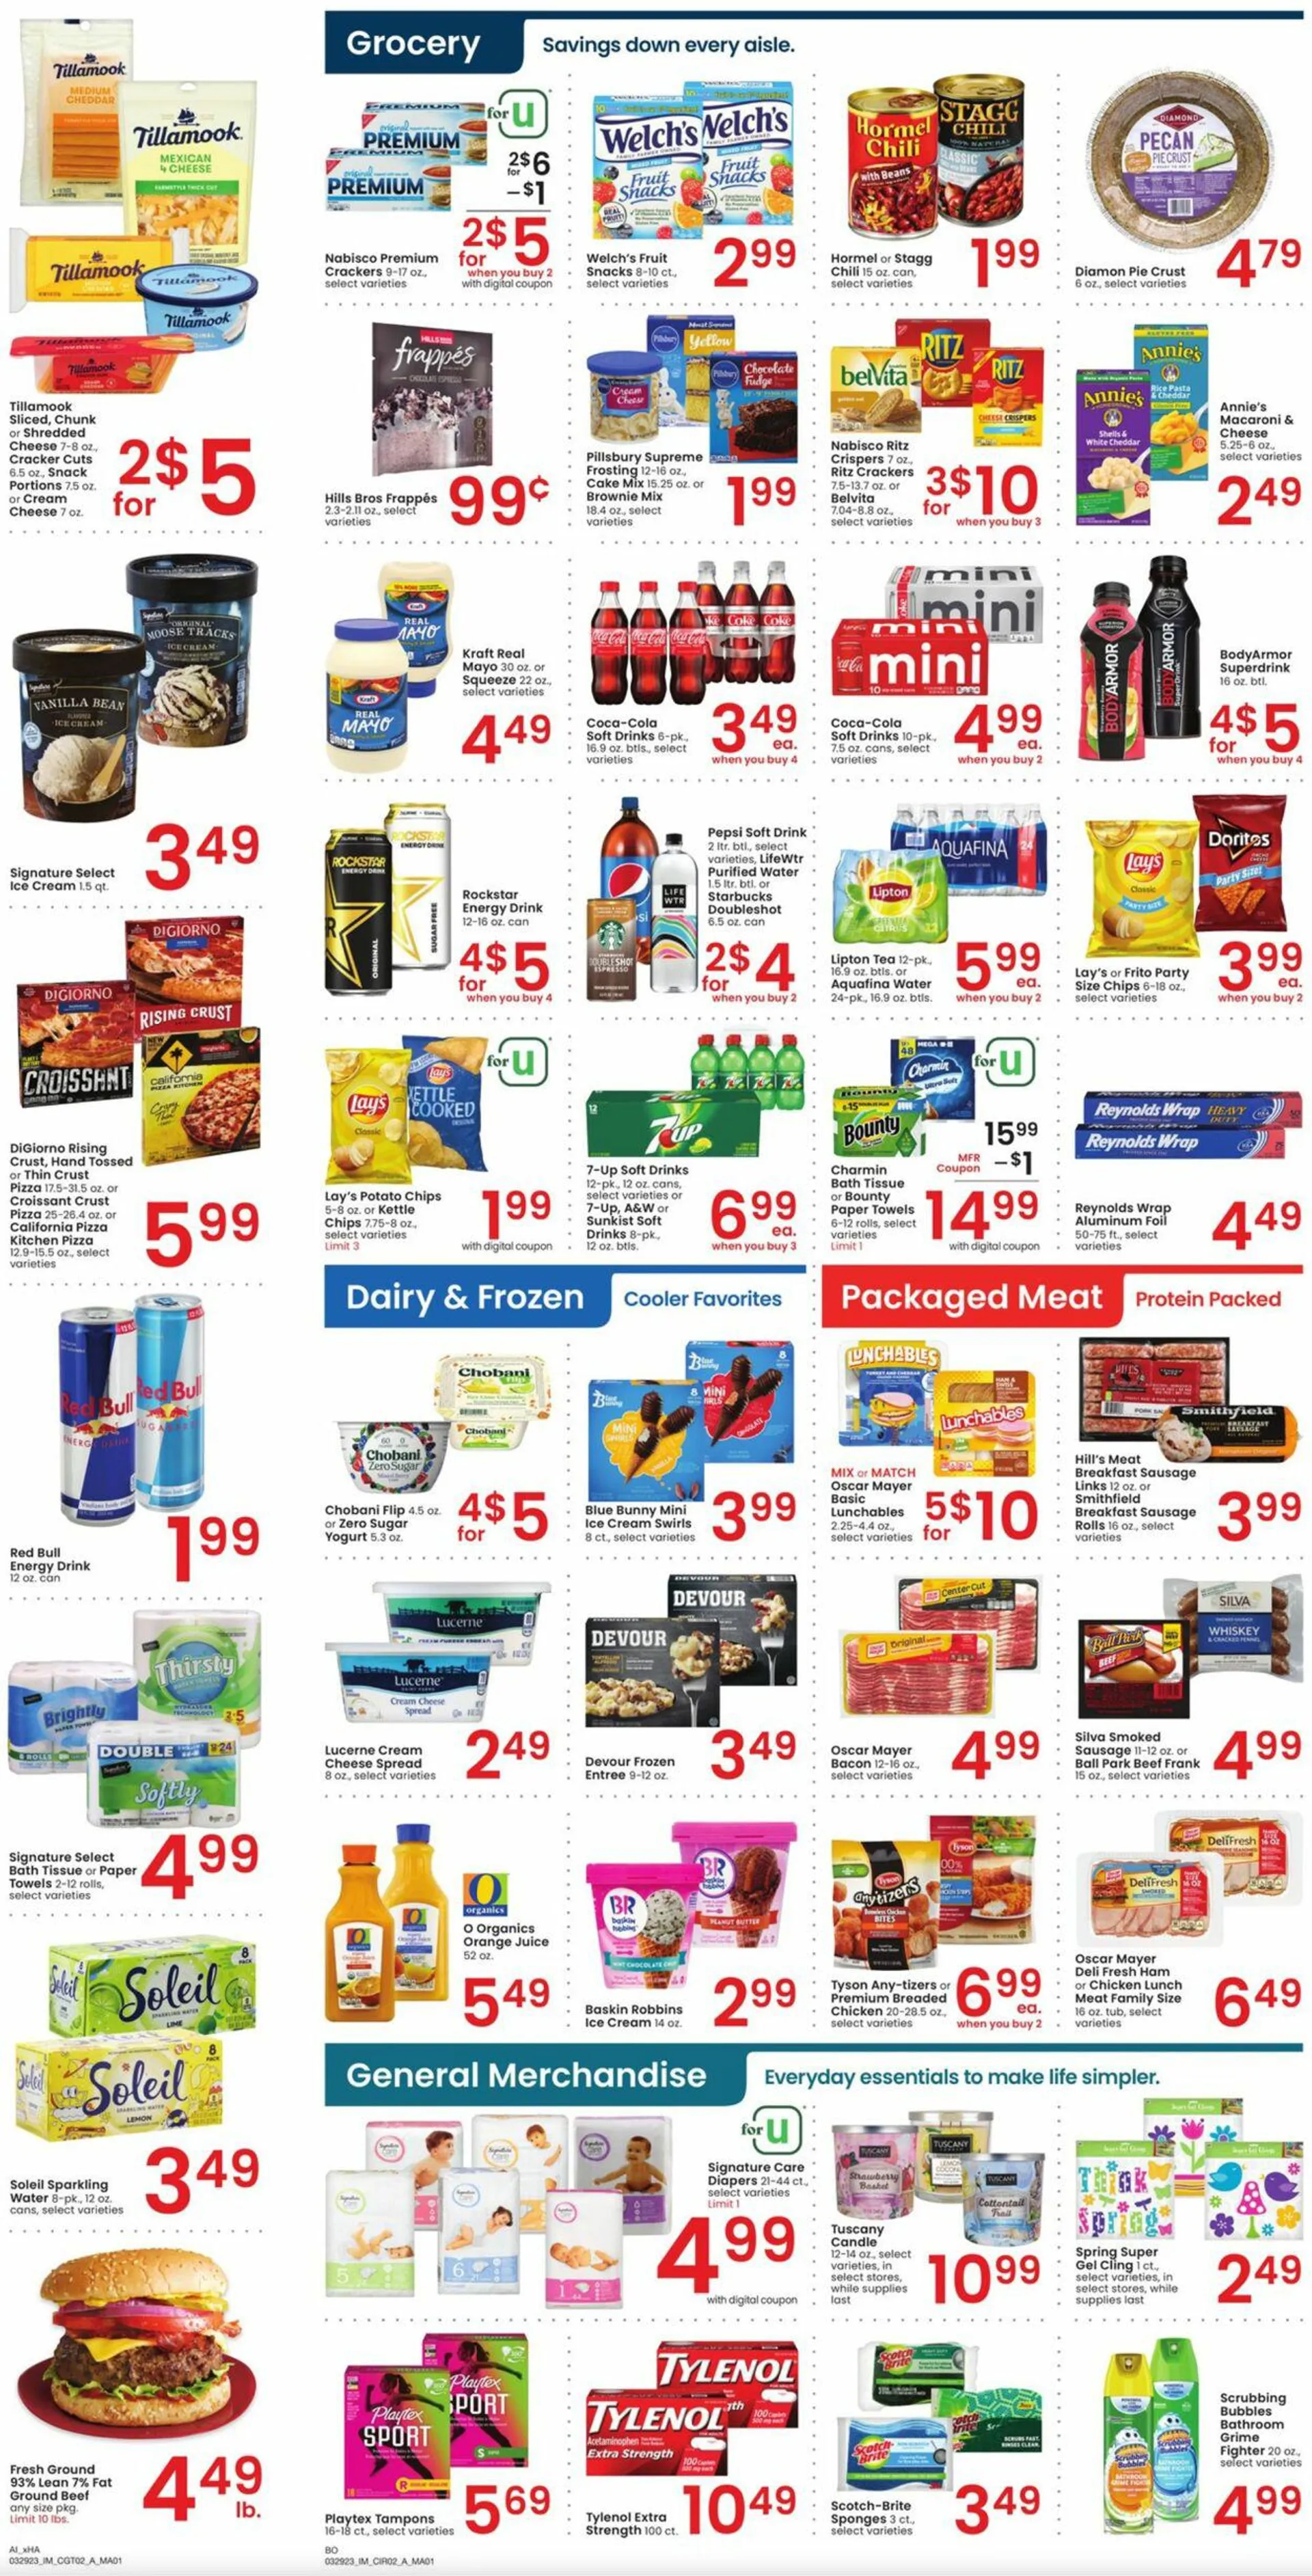 Albertsons Current weekly ad - 2